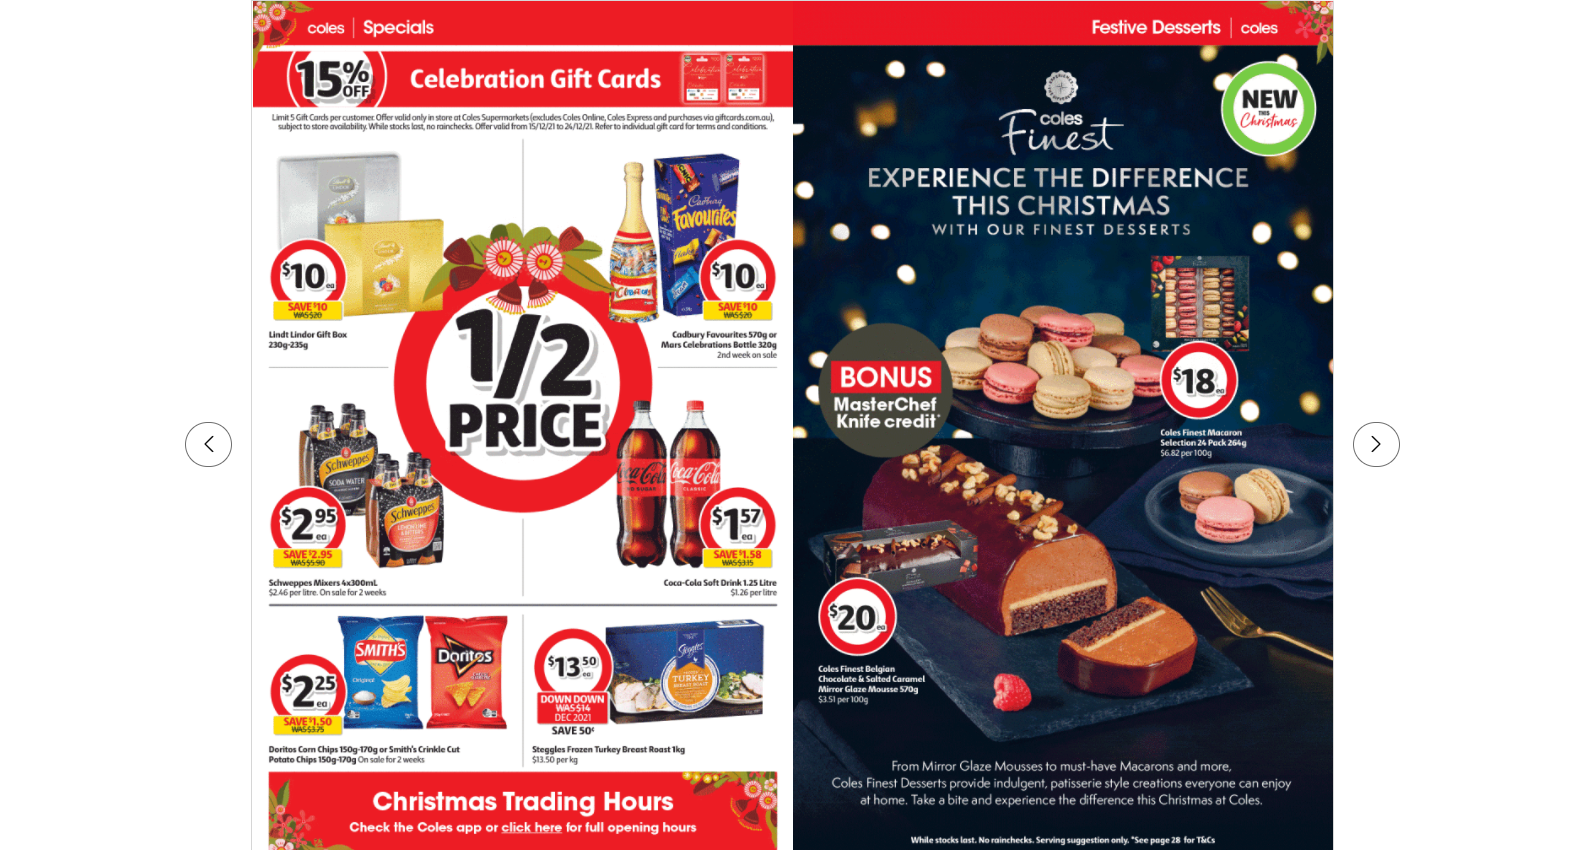 Coles this week's catalogue up to 50% OFF on groceries, beauty & everyday essentials(until 24th Dec)